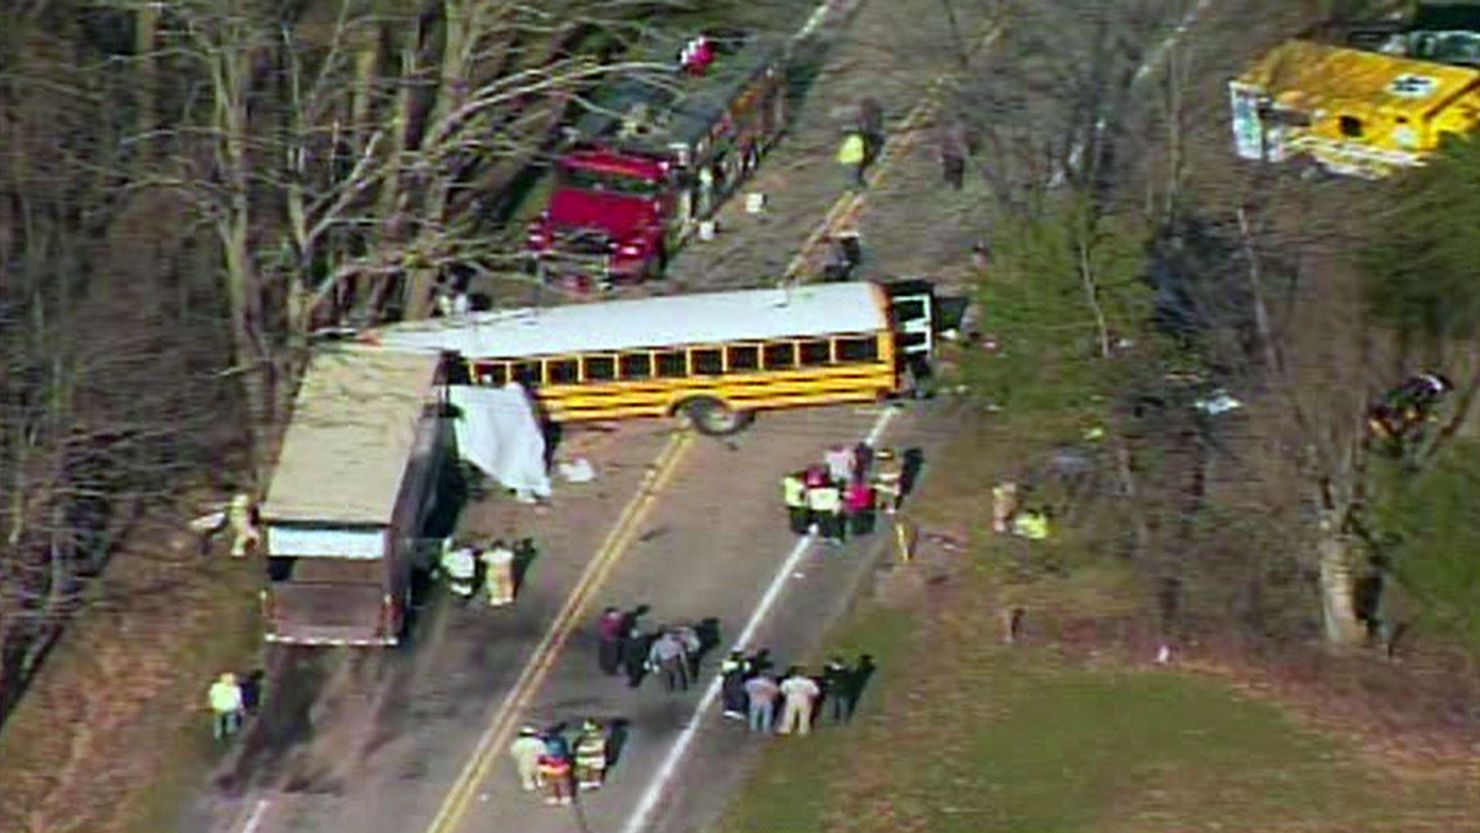 One person died and more than two dozen were hurt when a school bus collided with a truck in Pennsylvania.